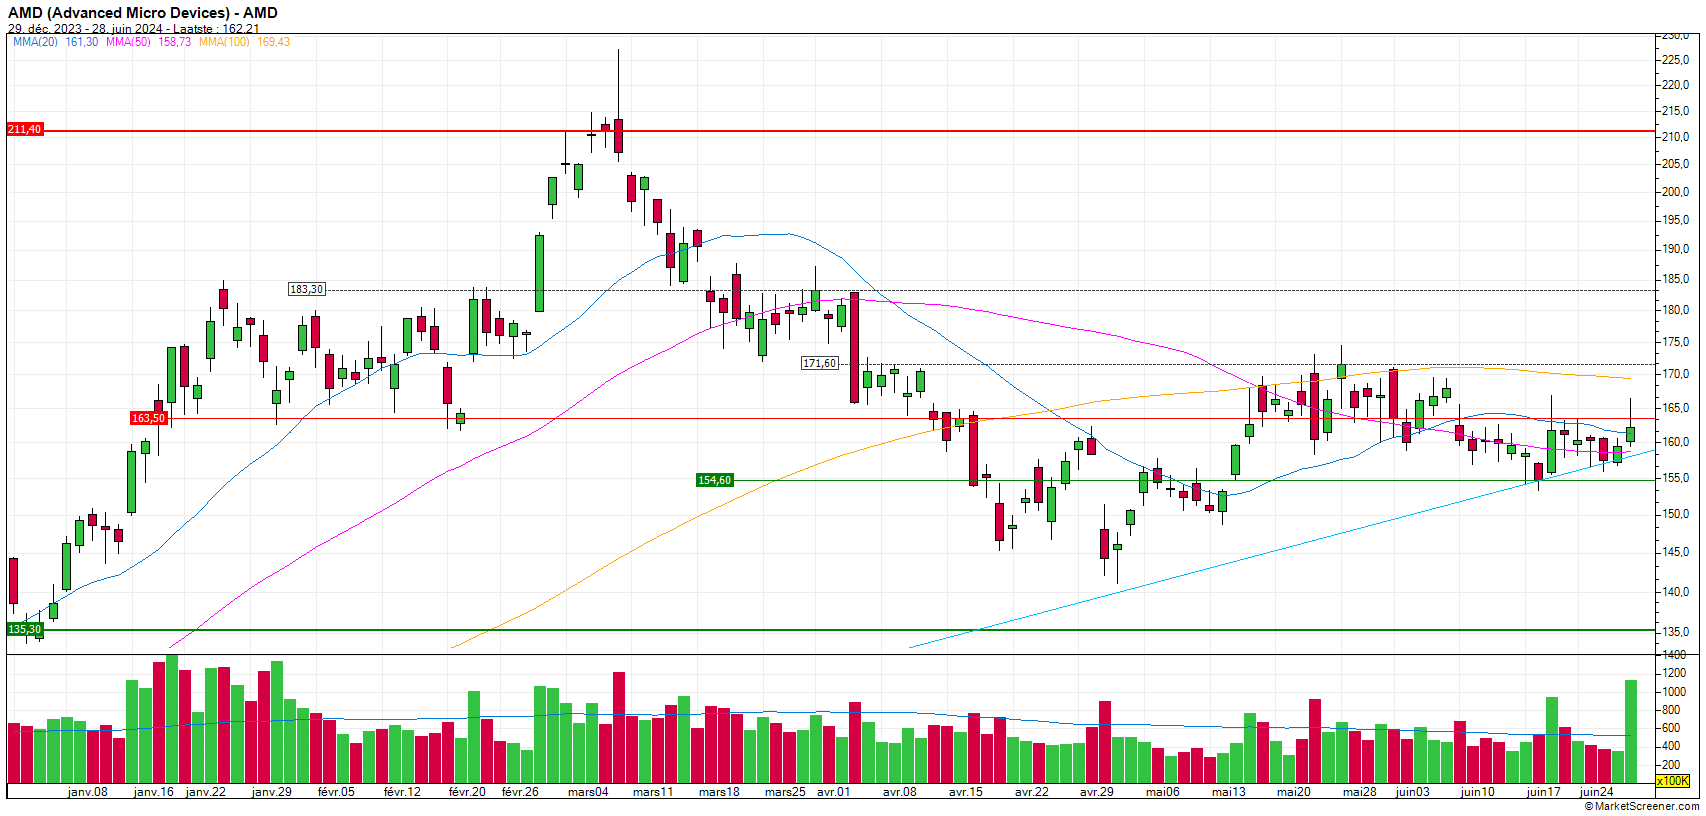 https://www.zonebourse.com/zbcache/charts/ObjectChart.aspx?Name=19475876&Type=Custom&Intraday=1&Width=1706&Height=816&Cycle=DAY1&Duration=6&ShowCopyright=2&Company=Skin:Alex_nl&ShowName=1&ShowDate=1&Show&Render=Candle